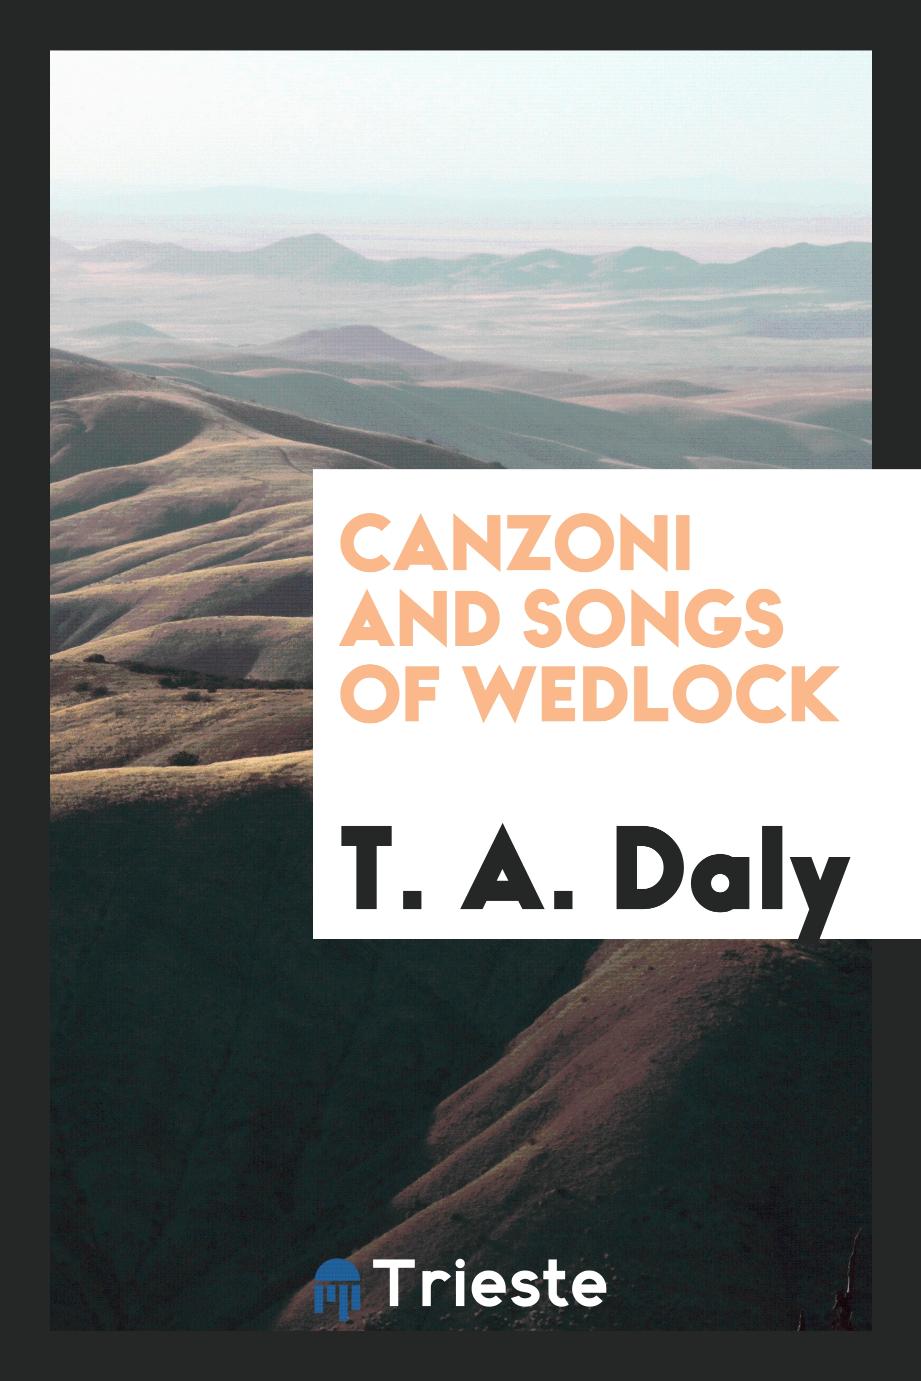 Canzoni and Songs of wedlock